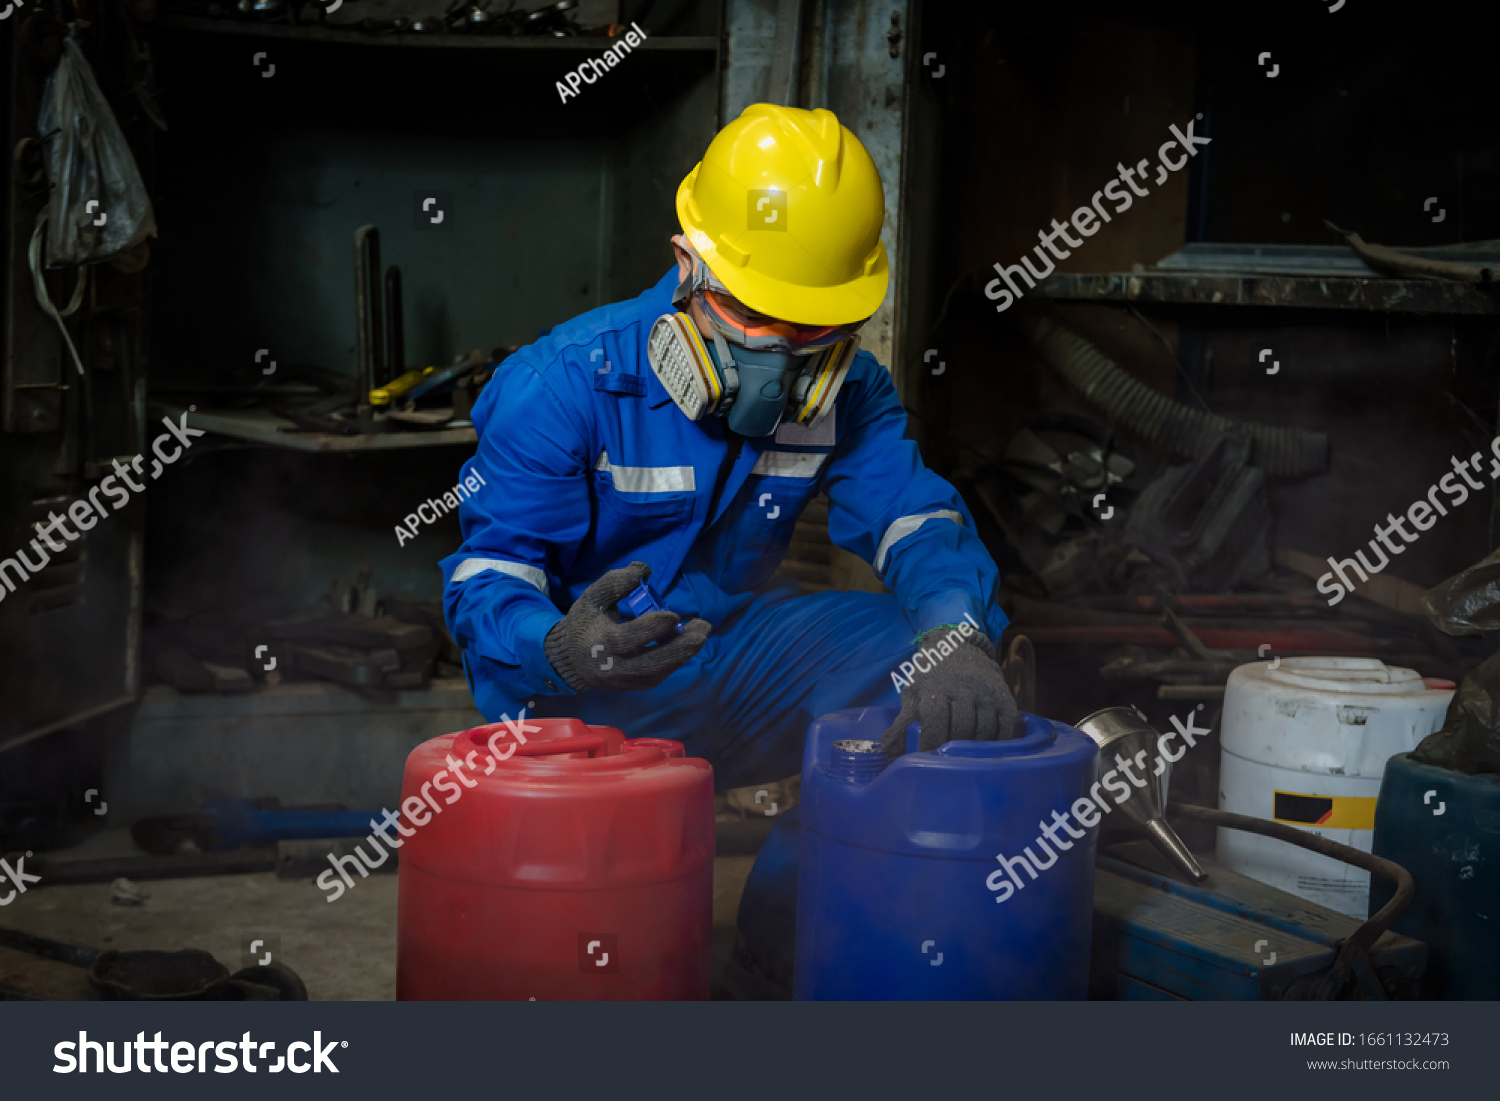 A Worker industry wearing safety uniform ,black gloves and gas mask under checking chemical tank in industry factory work #1661132473